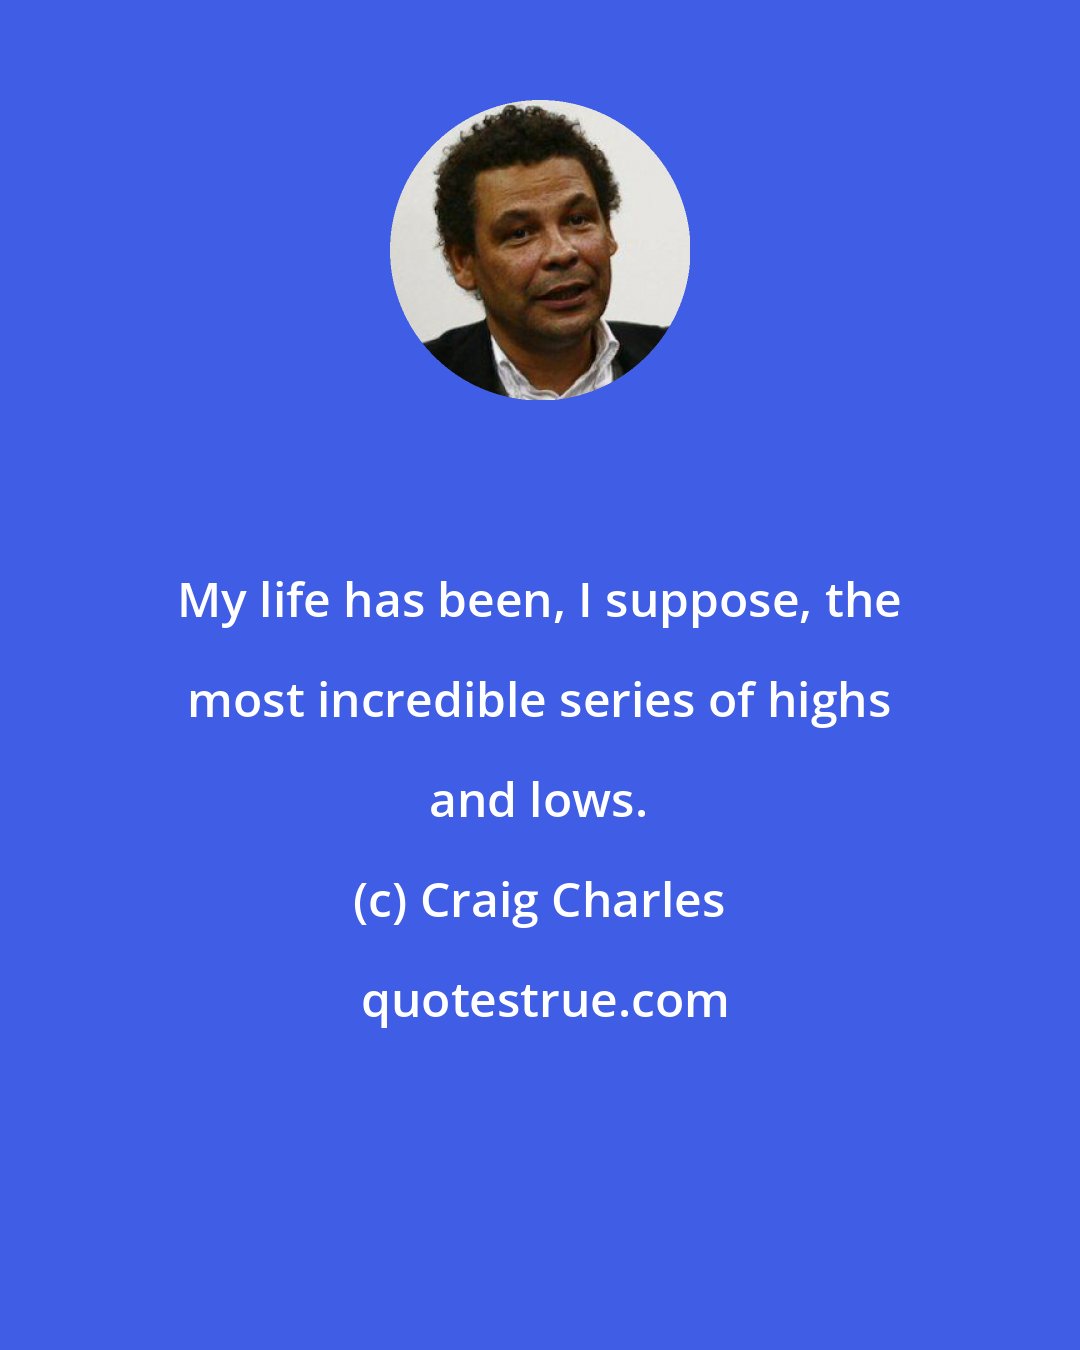 Craig Charles: My life has been, I suppose, the most incredible series of highs and lows.